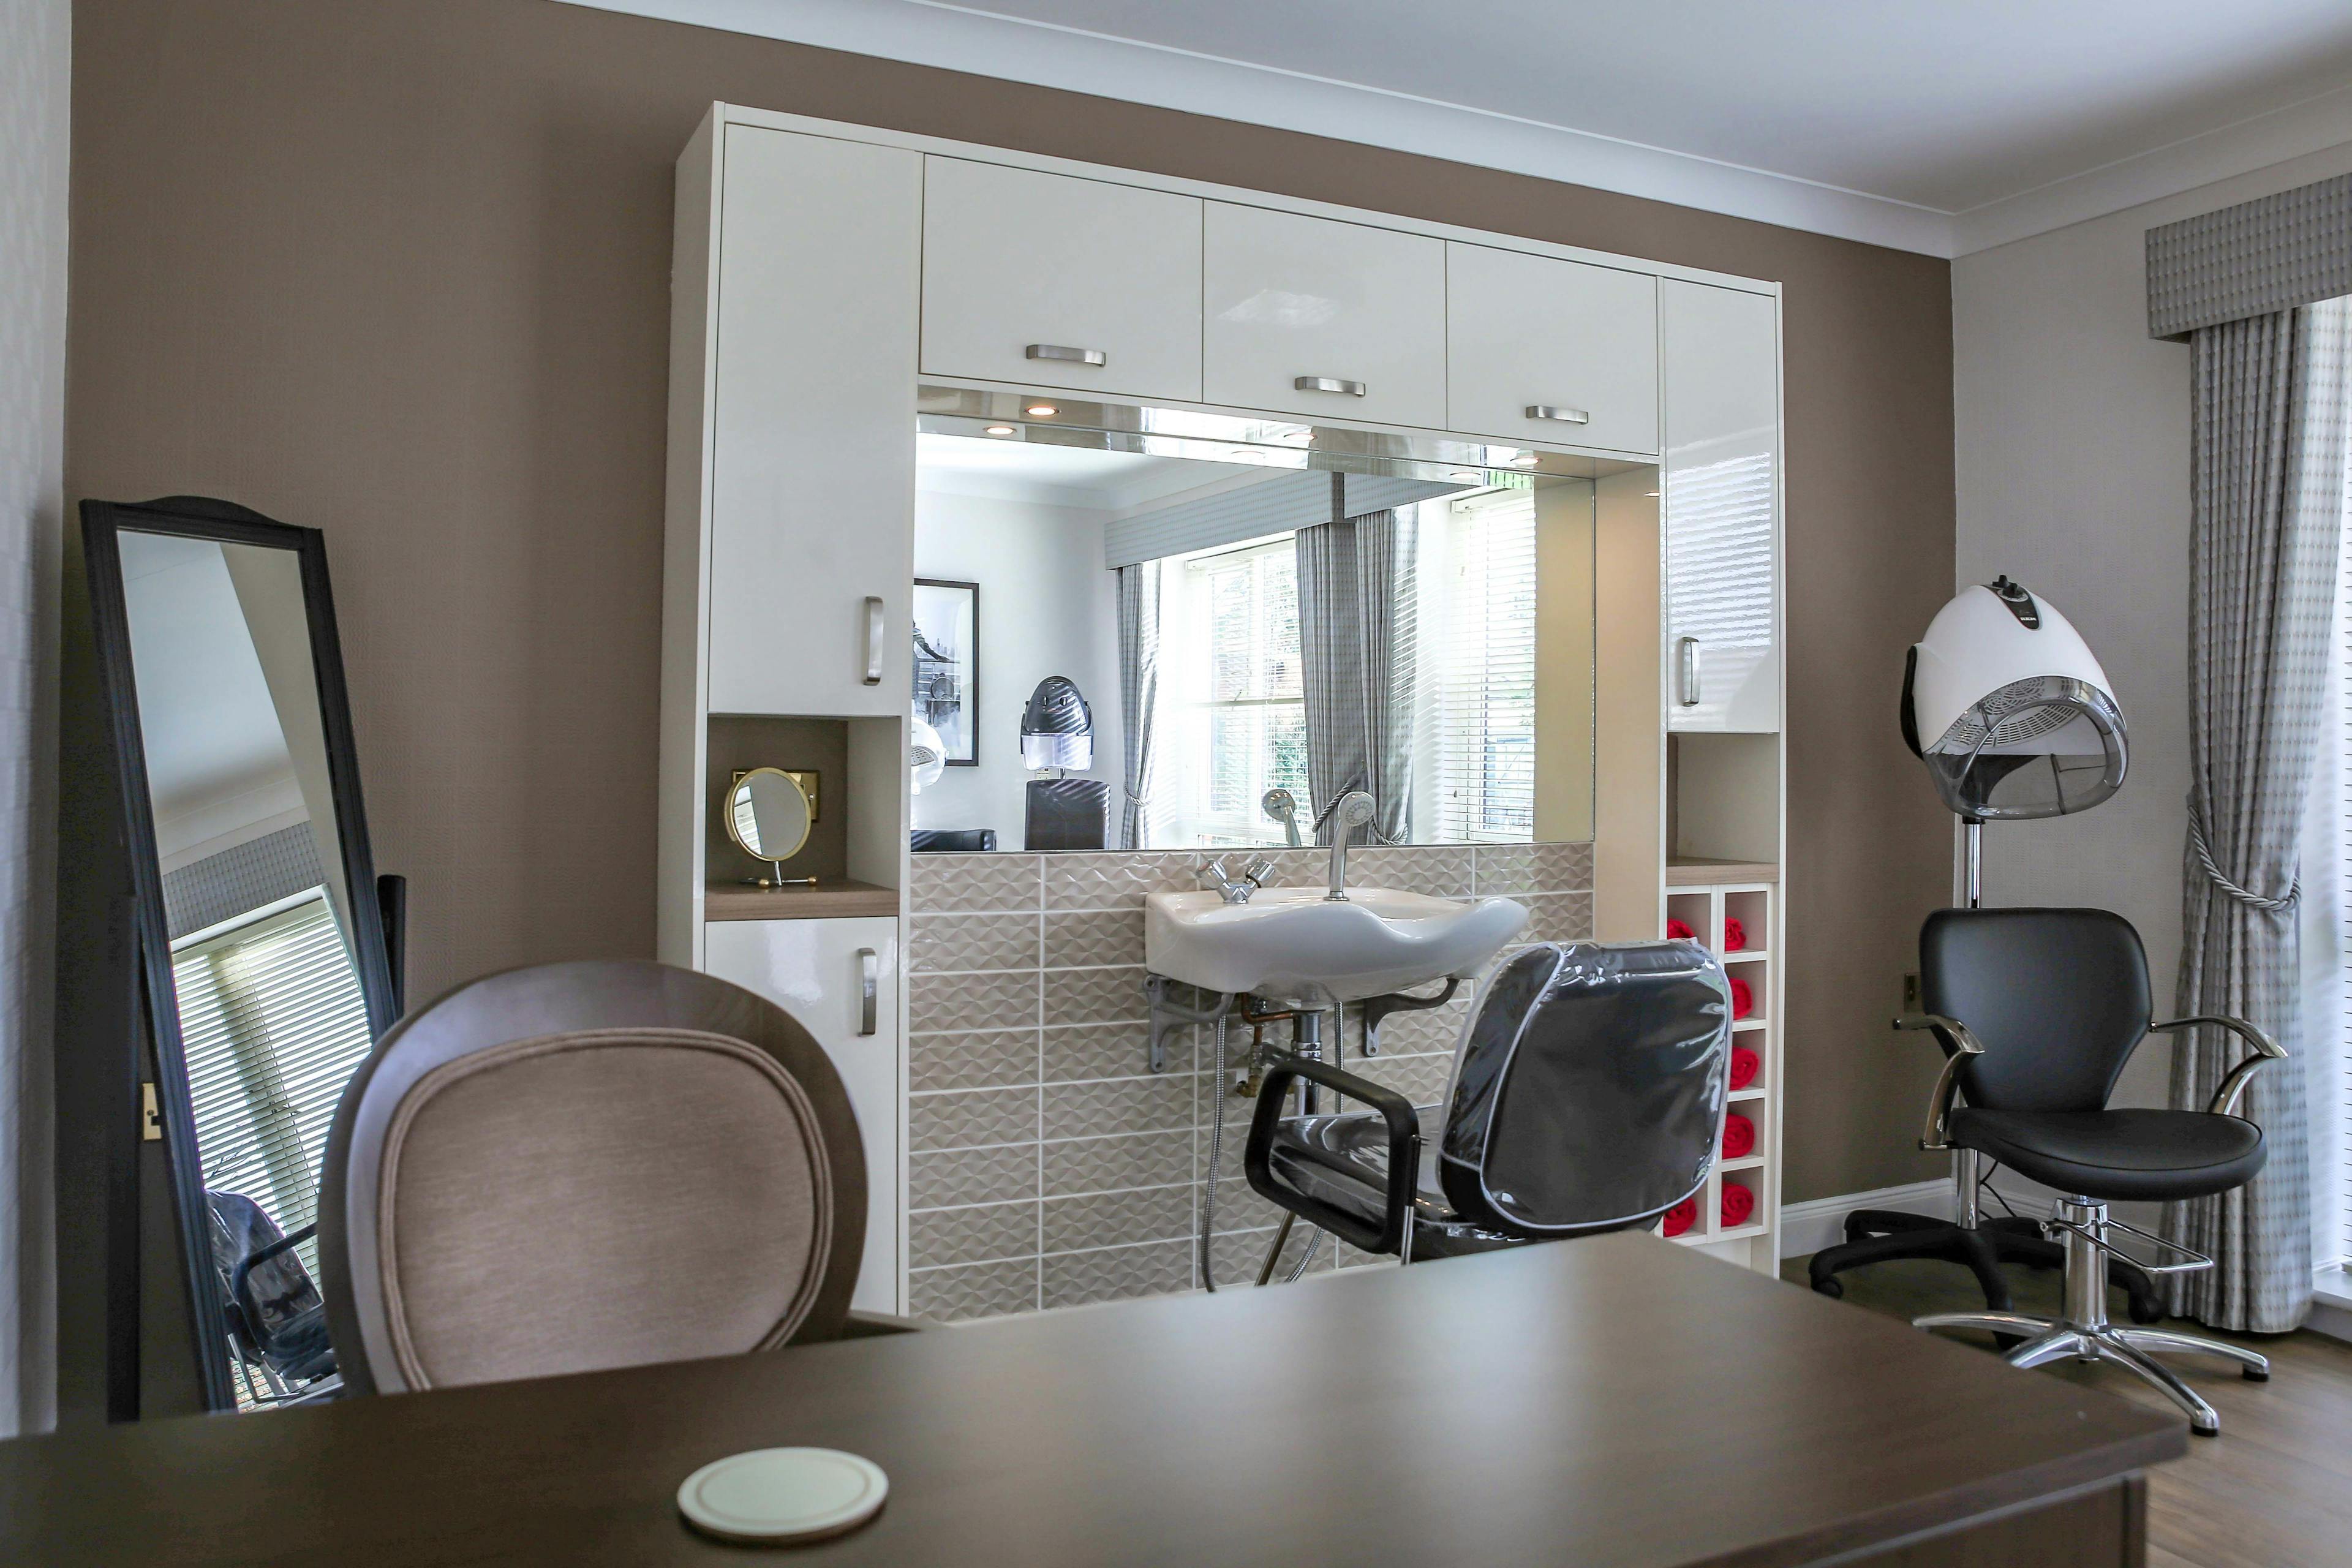 Salon at Station Court Care Home in Ashington, Northumberland